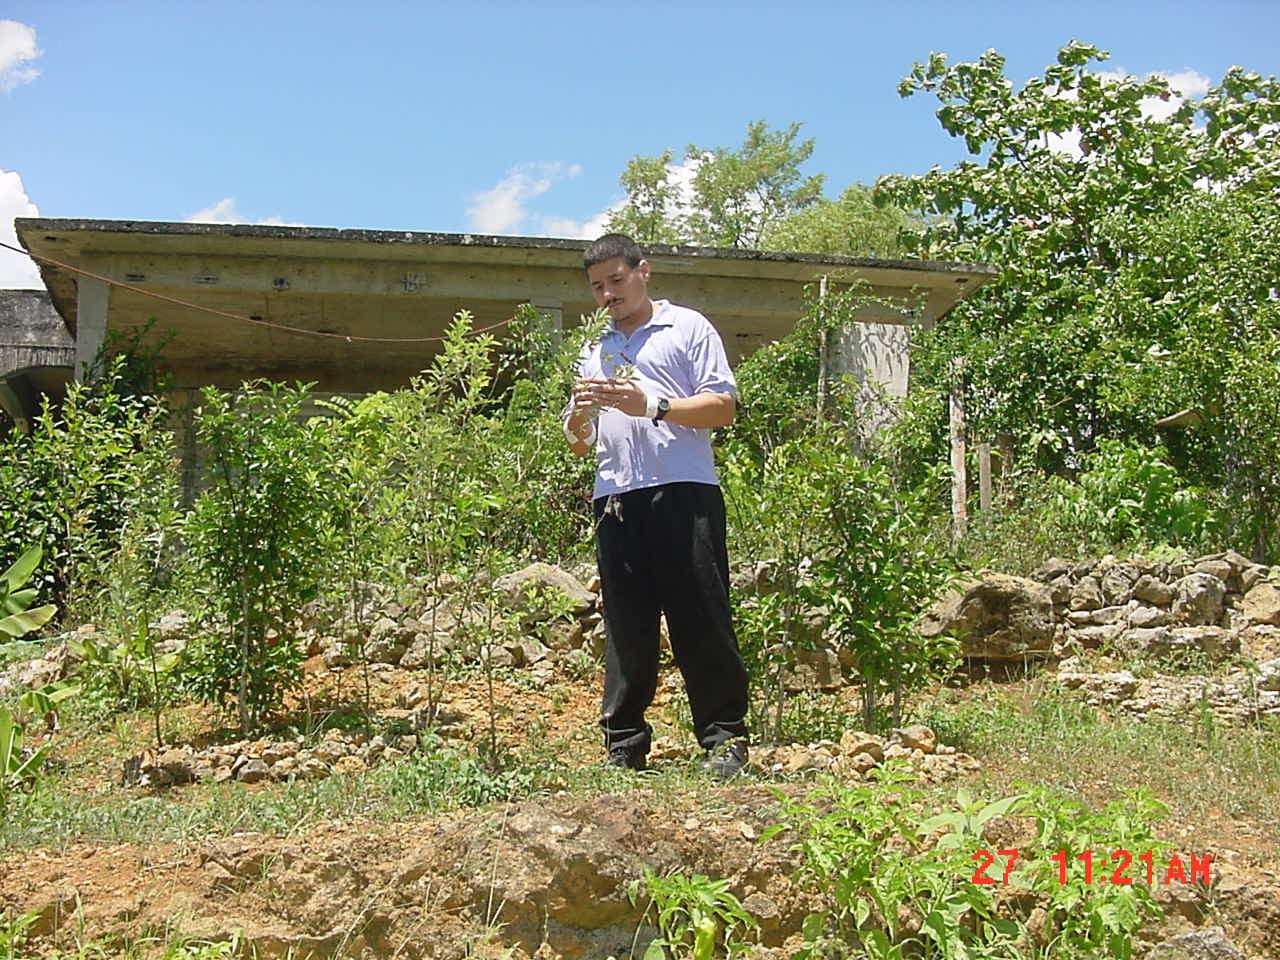 SAMUEL TELLADO ON A HILL IN VEGA ALTA puzzle online from photo